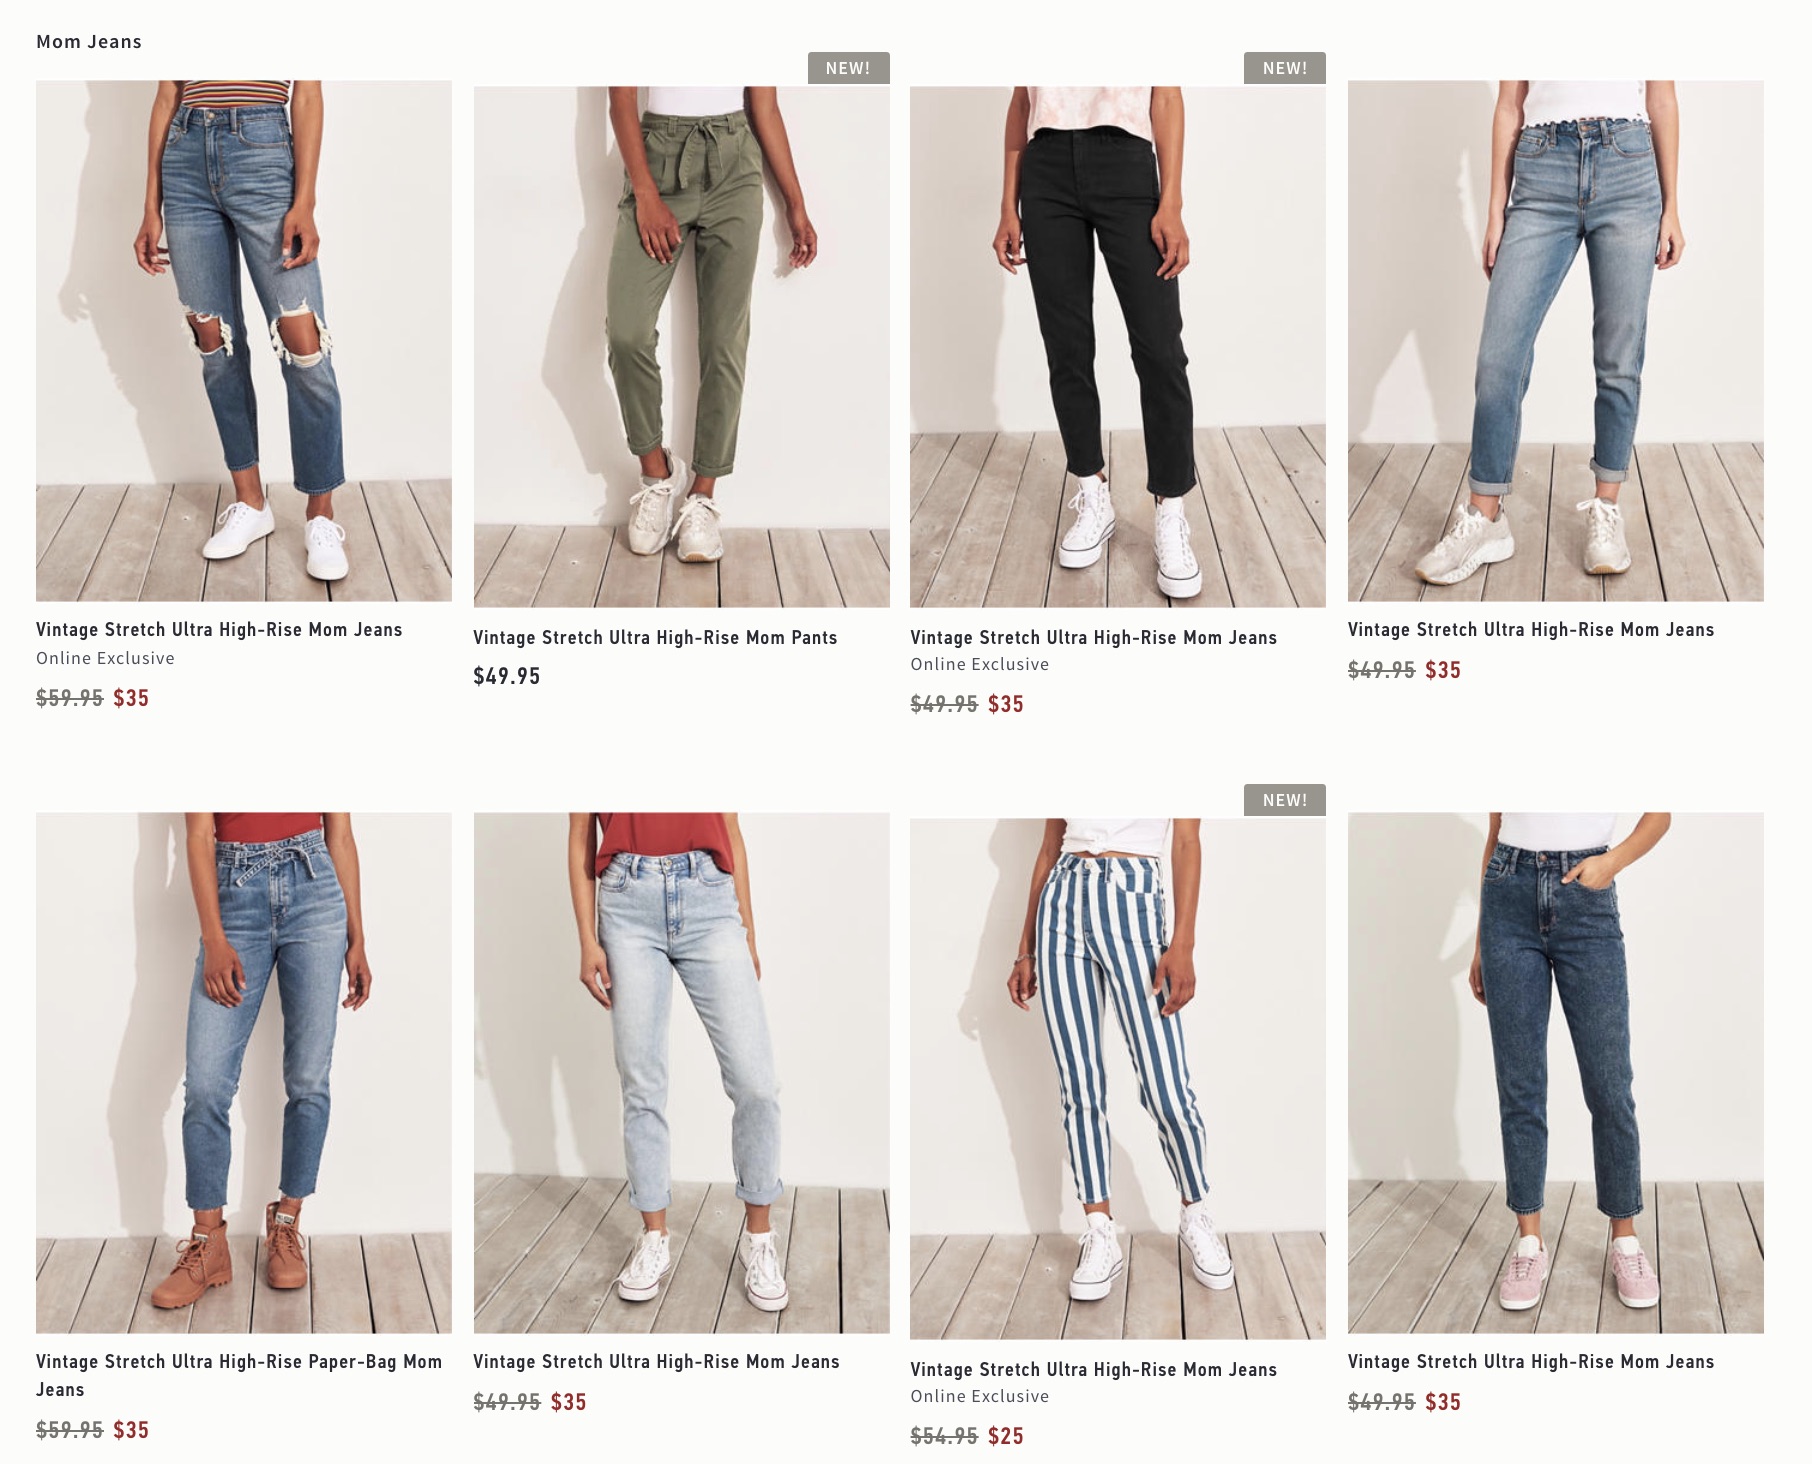 Mom jeans at Hollister: Not exactly your mother's mom jeans